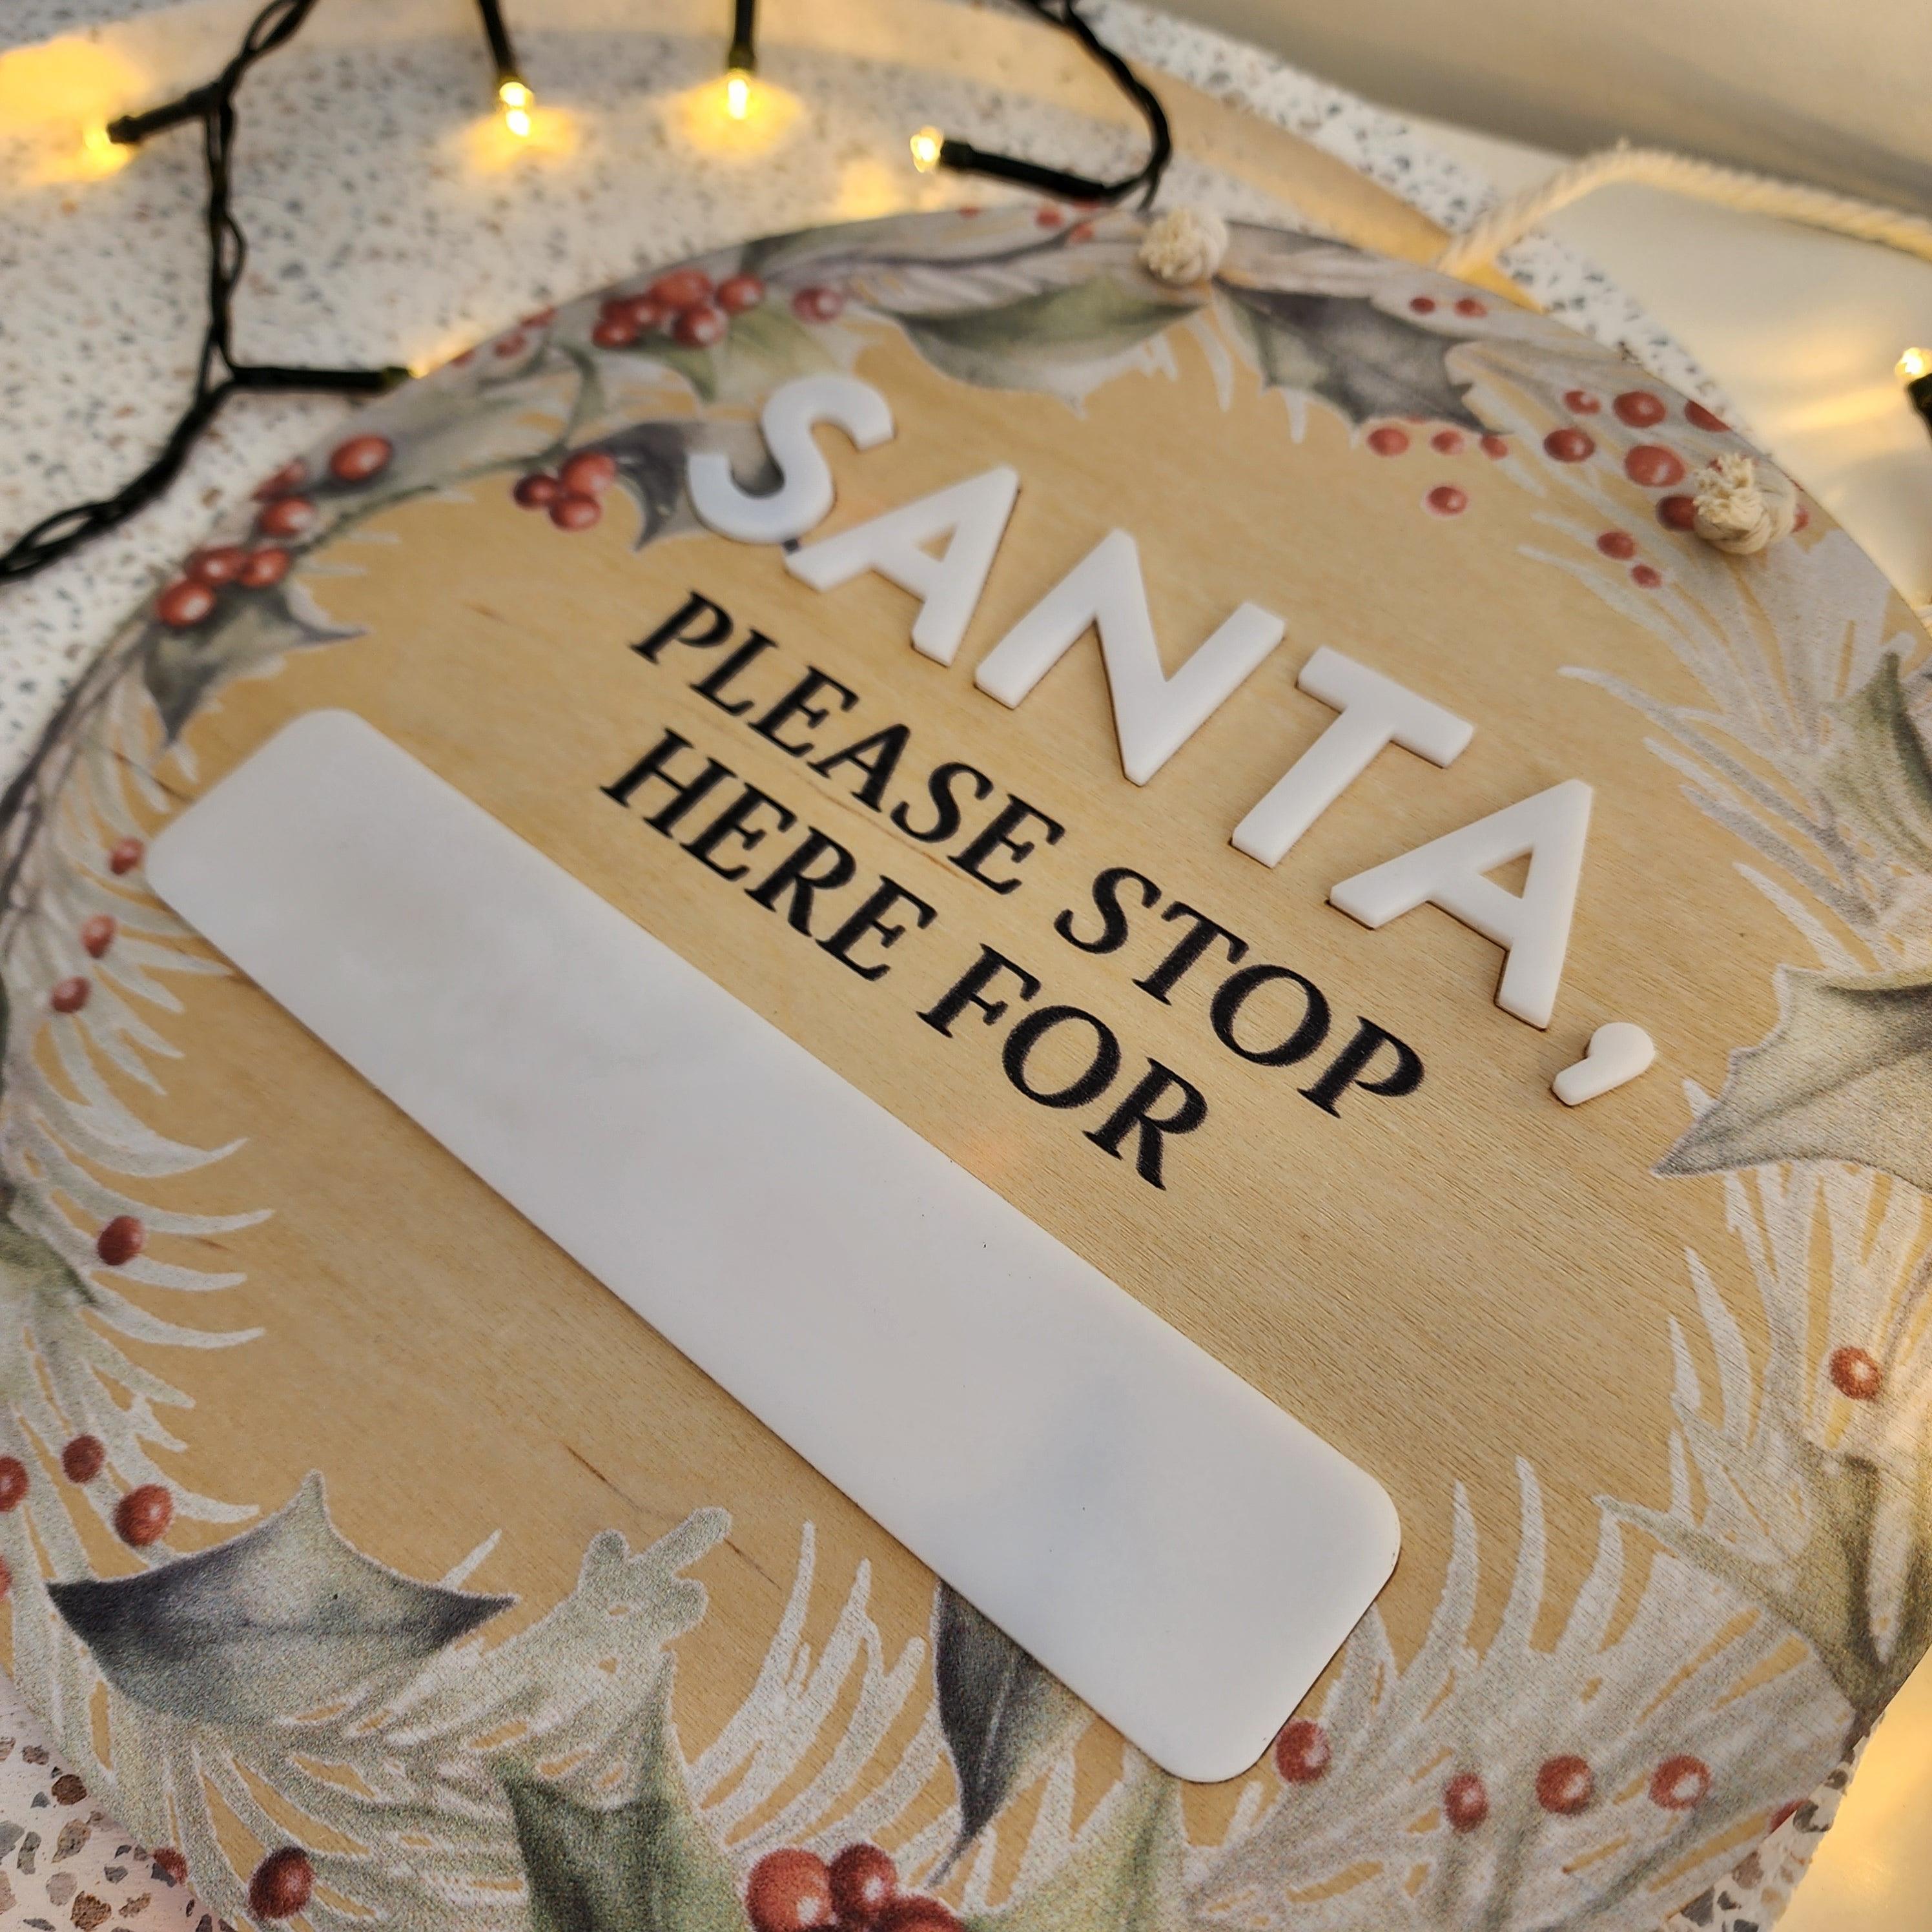 Santa Please Stop Here Disc - Christmas Hanging Decoration - The Willow Corner